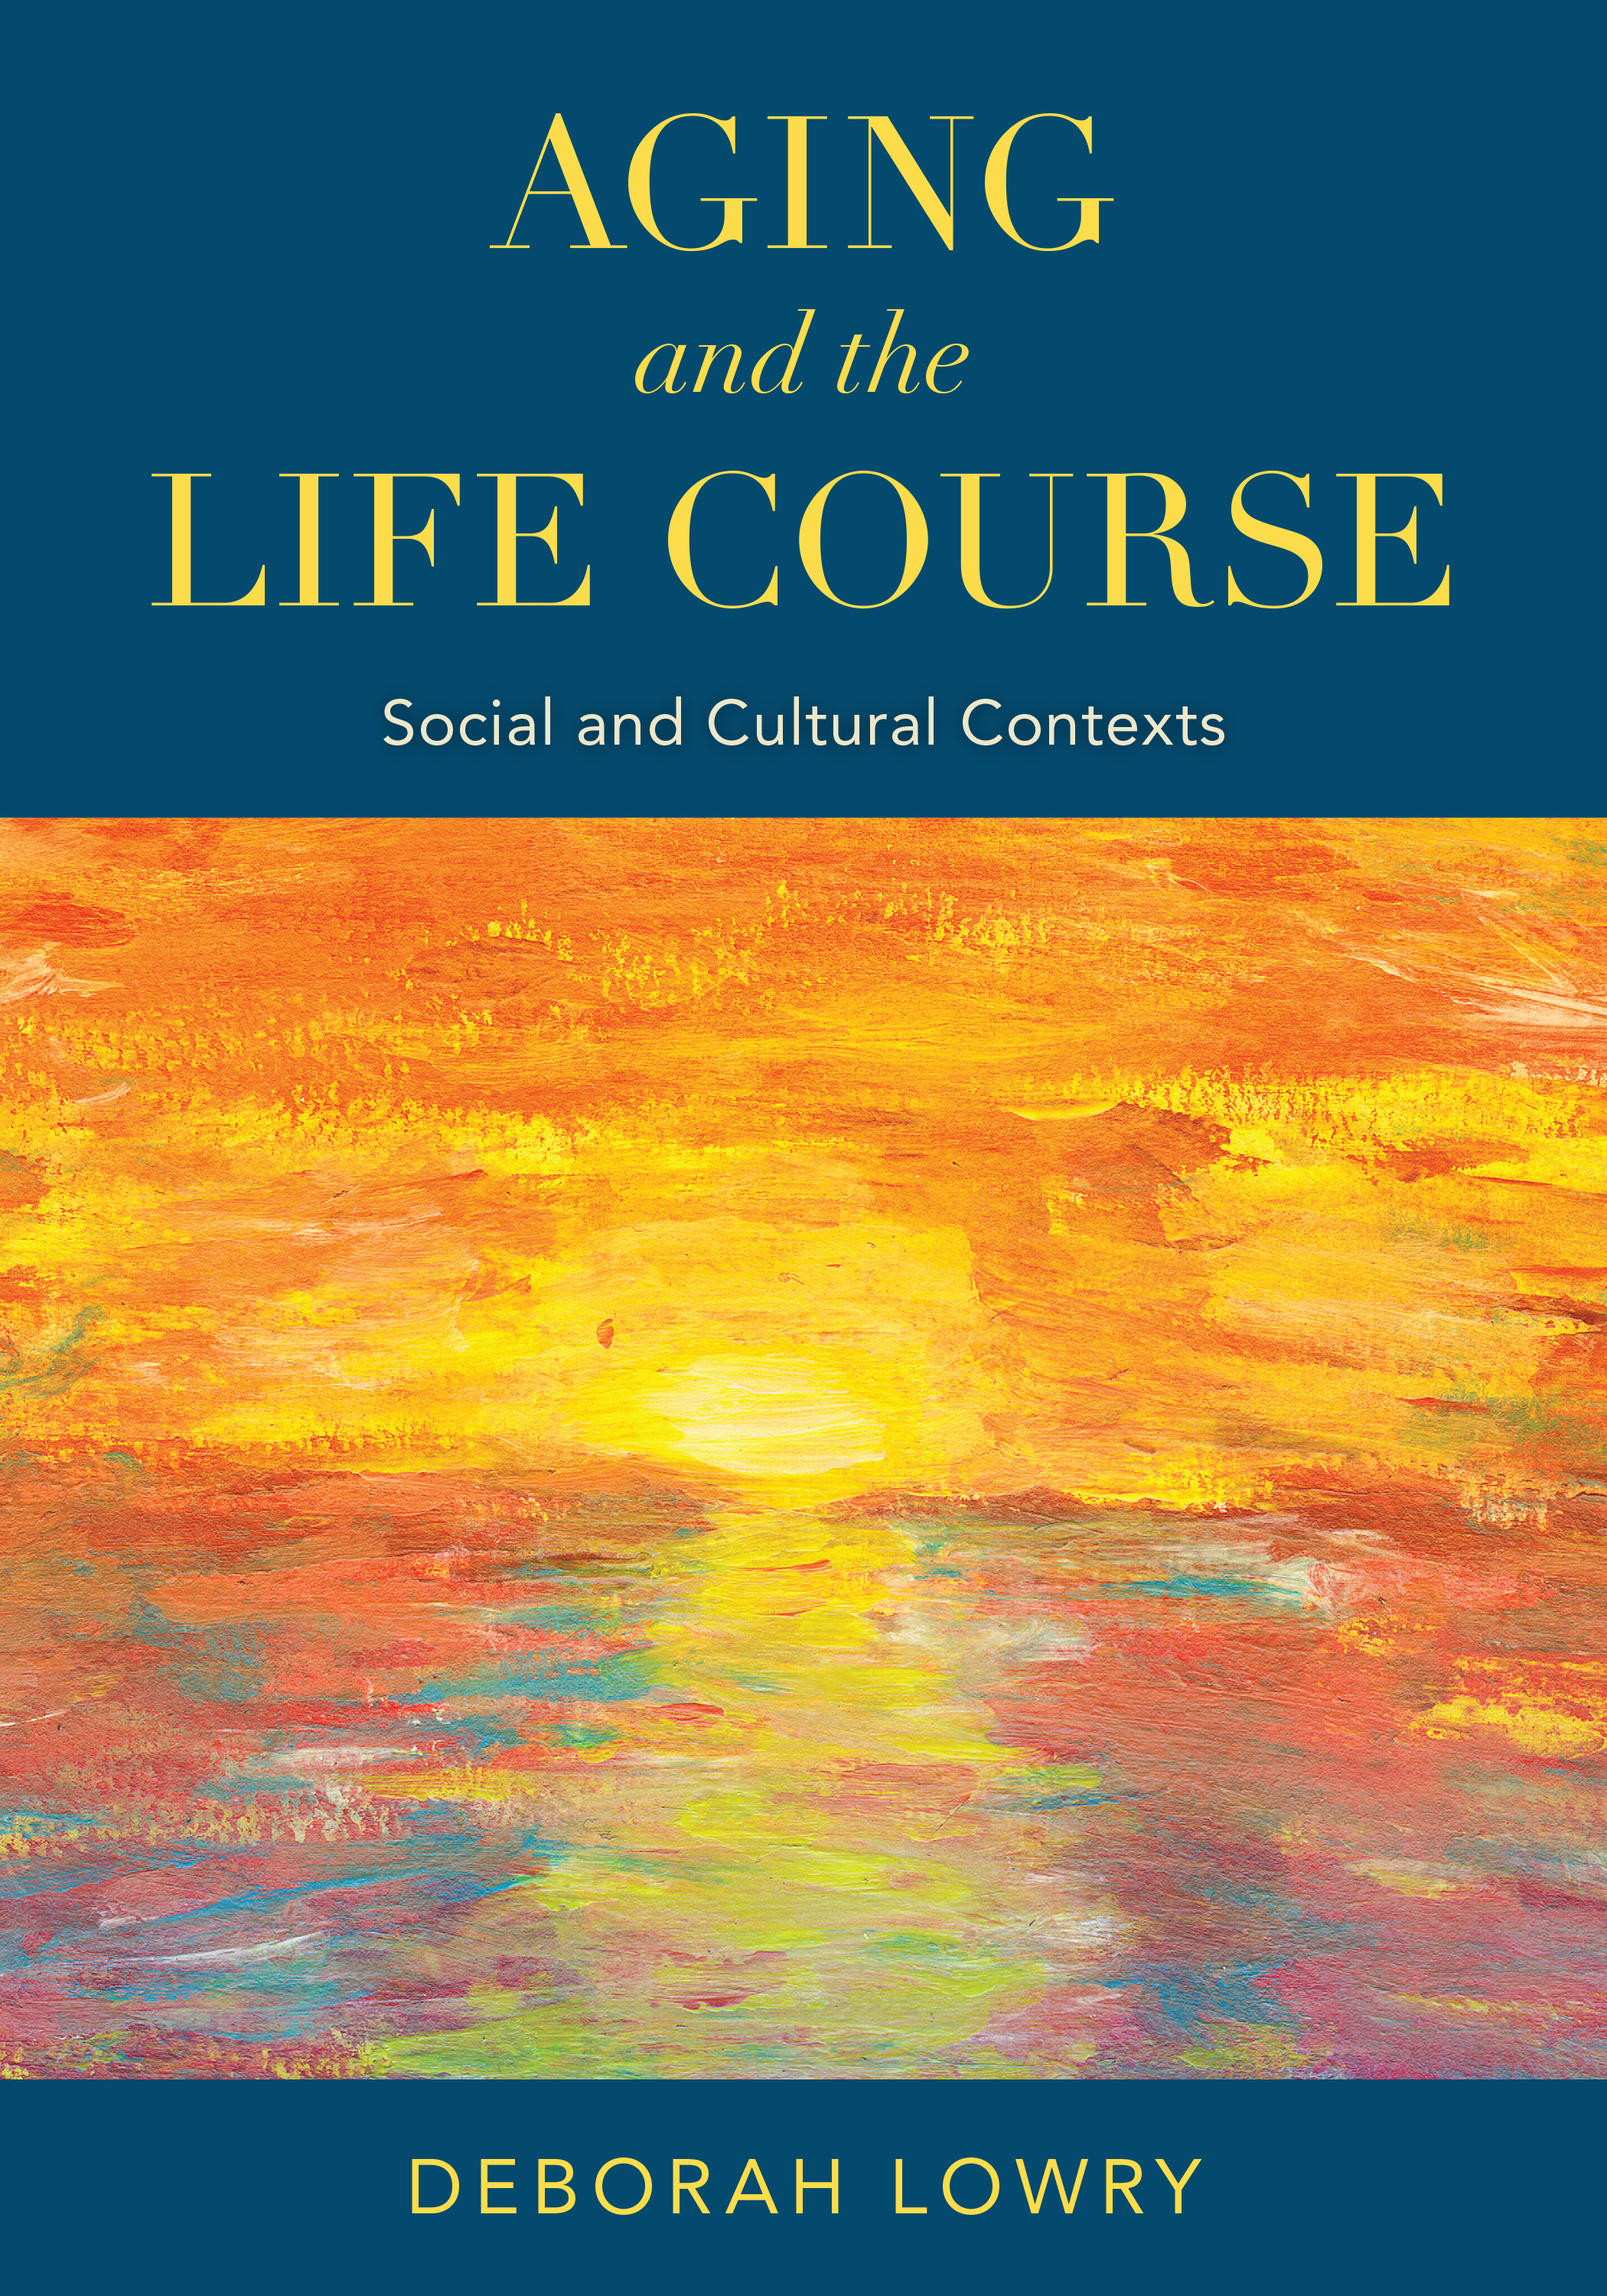 Aging and the Life Course: Social and Cultural Contexts